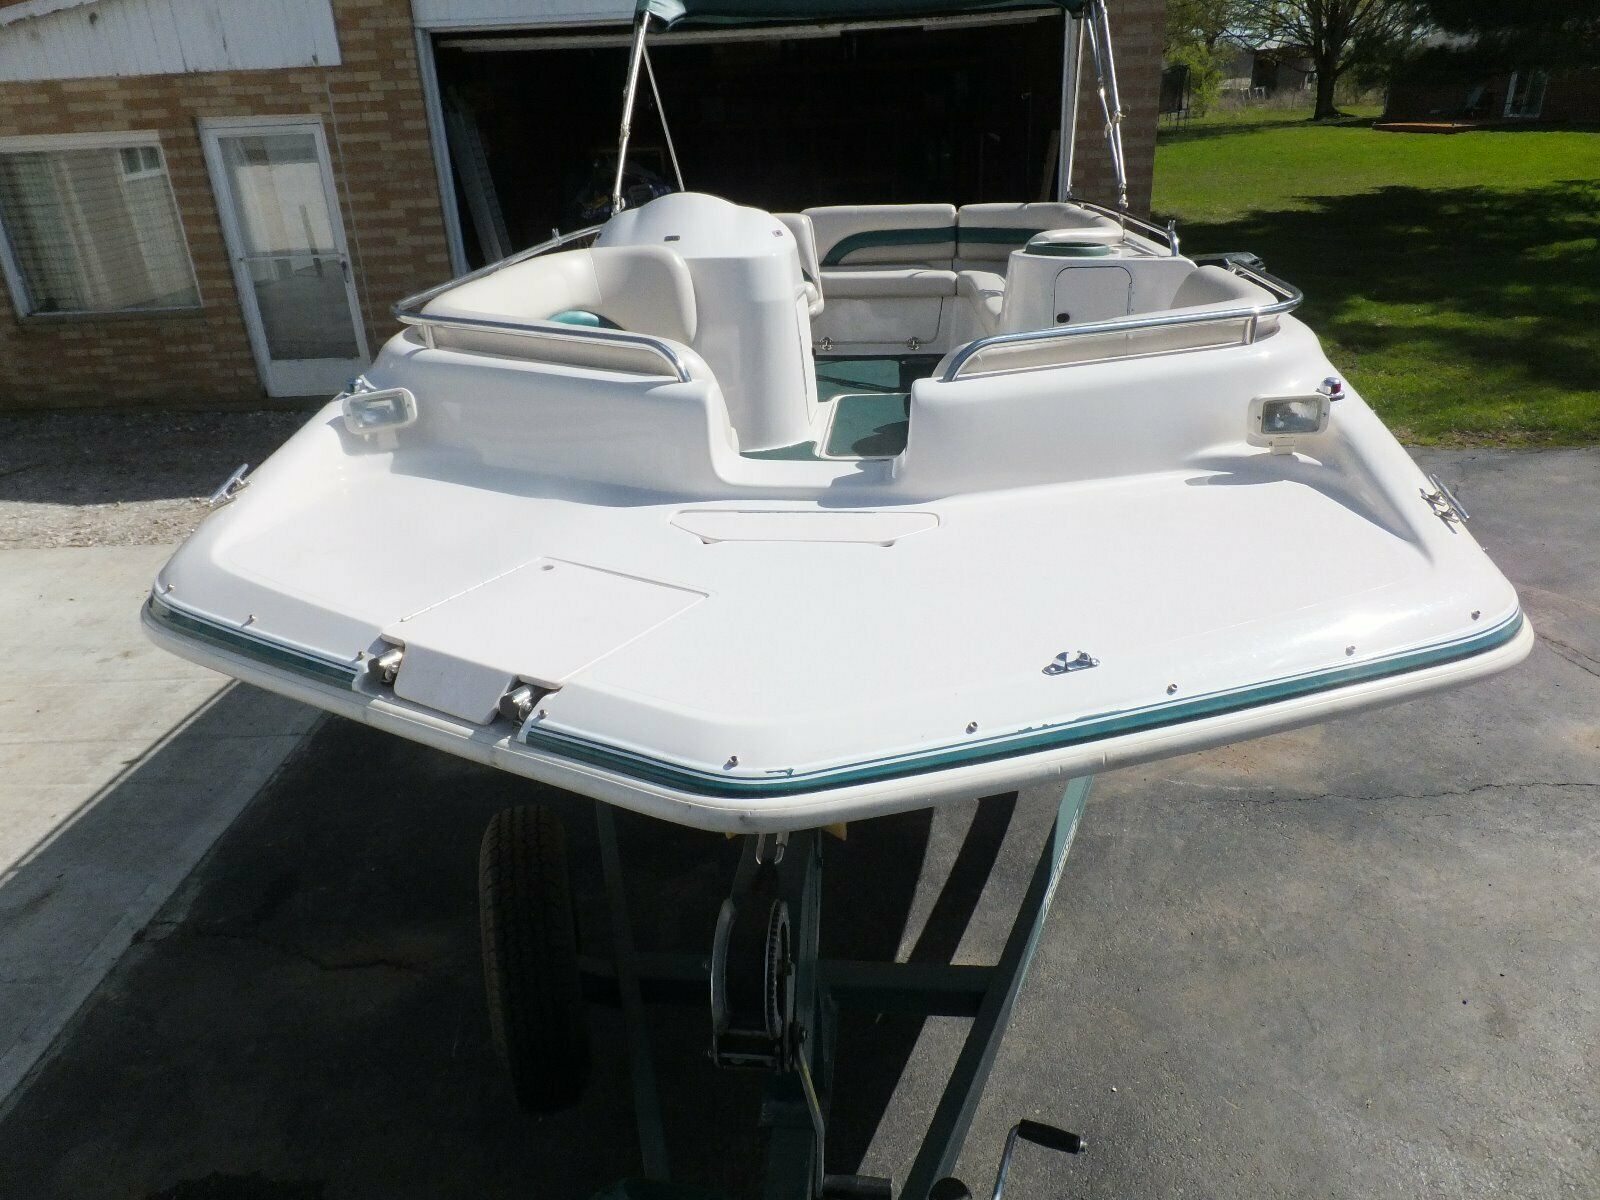 Hurricane 201 1999 for sale for $14,500 - Boats-from-USA.com